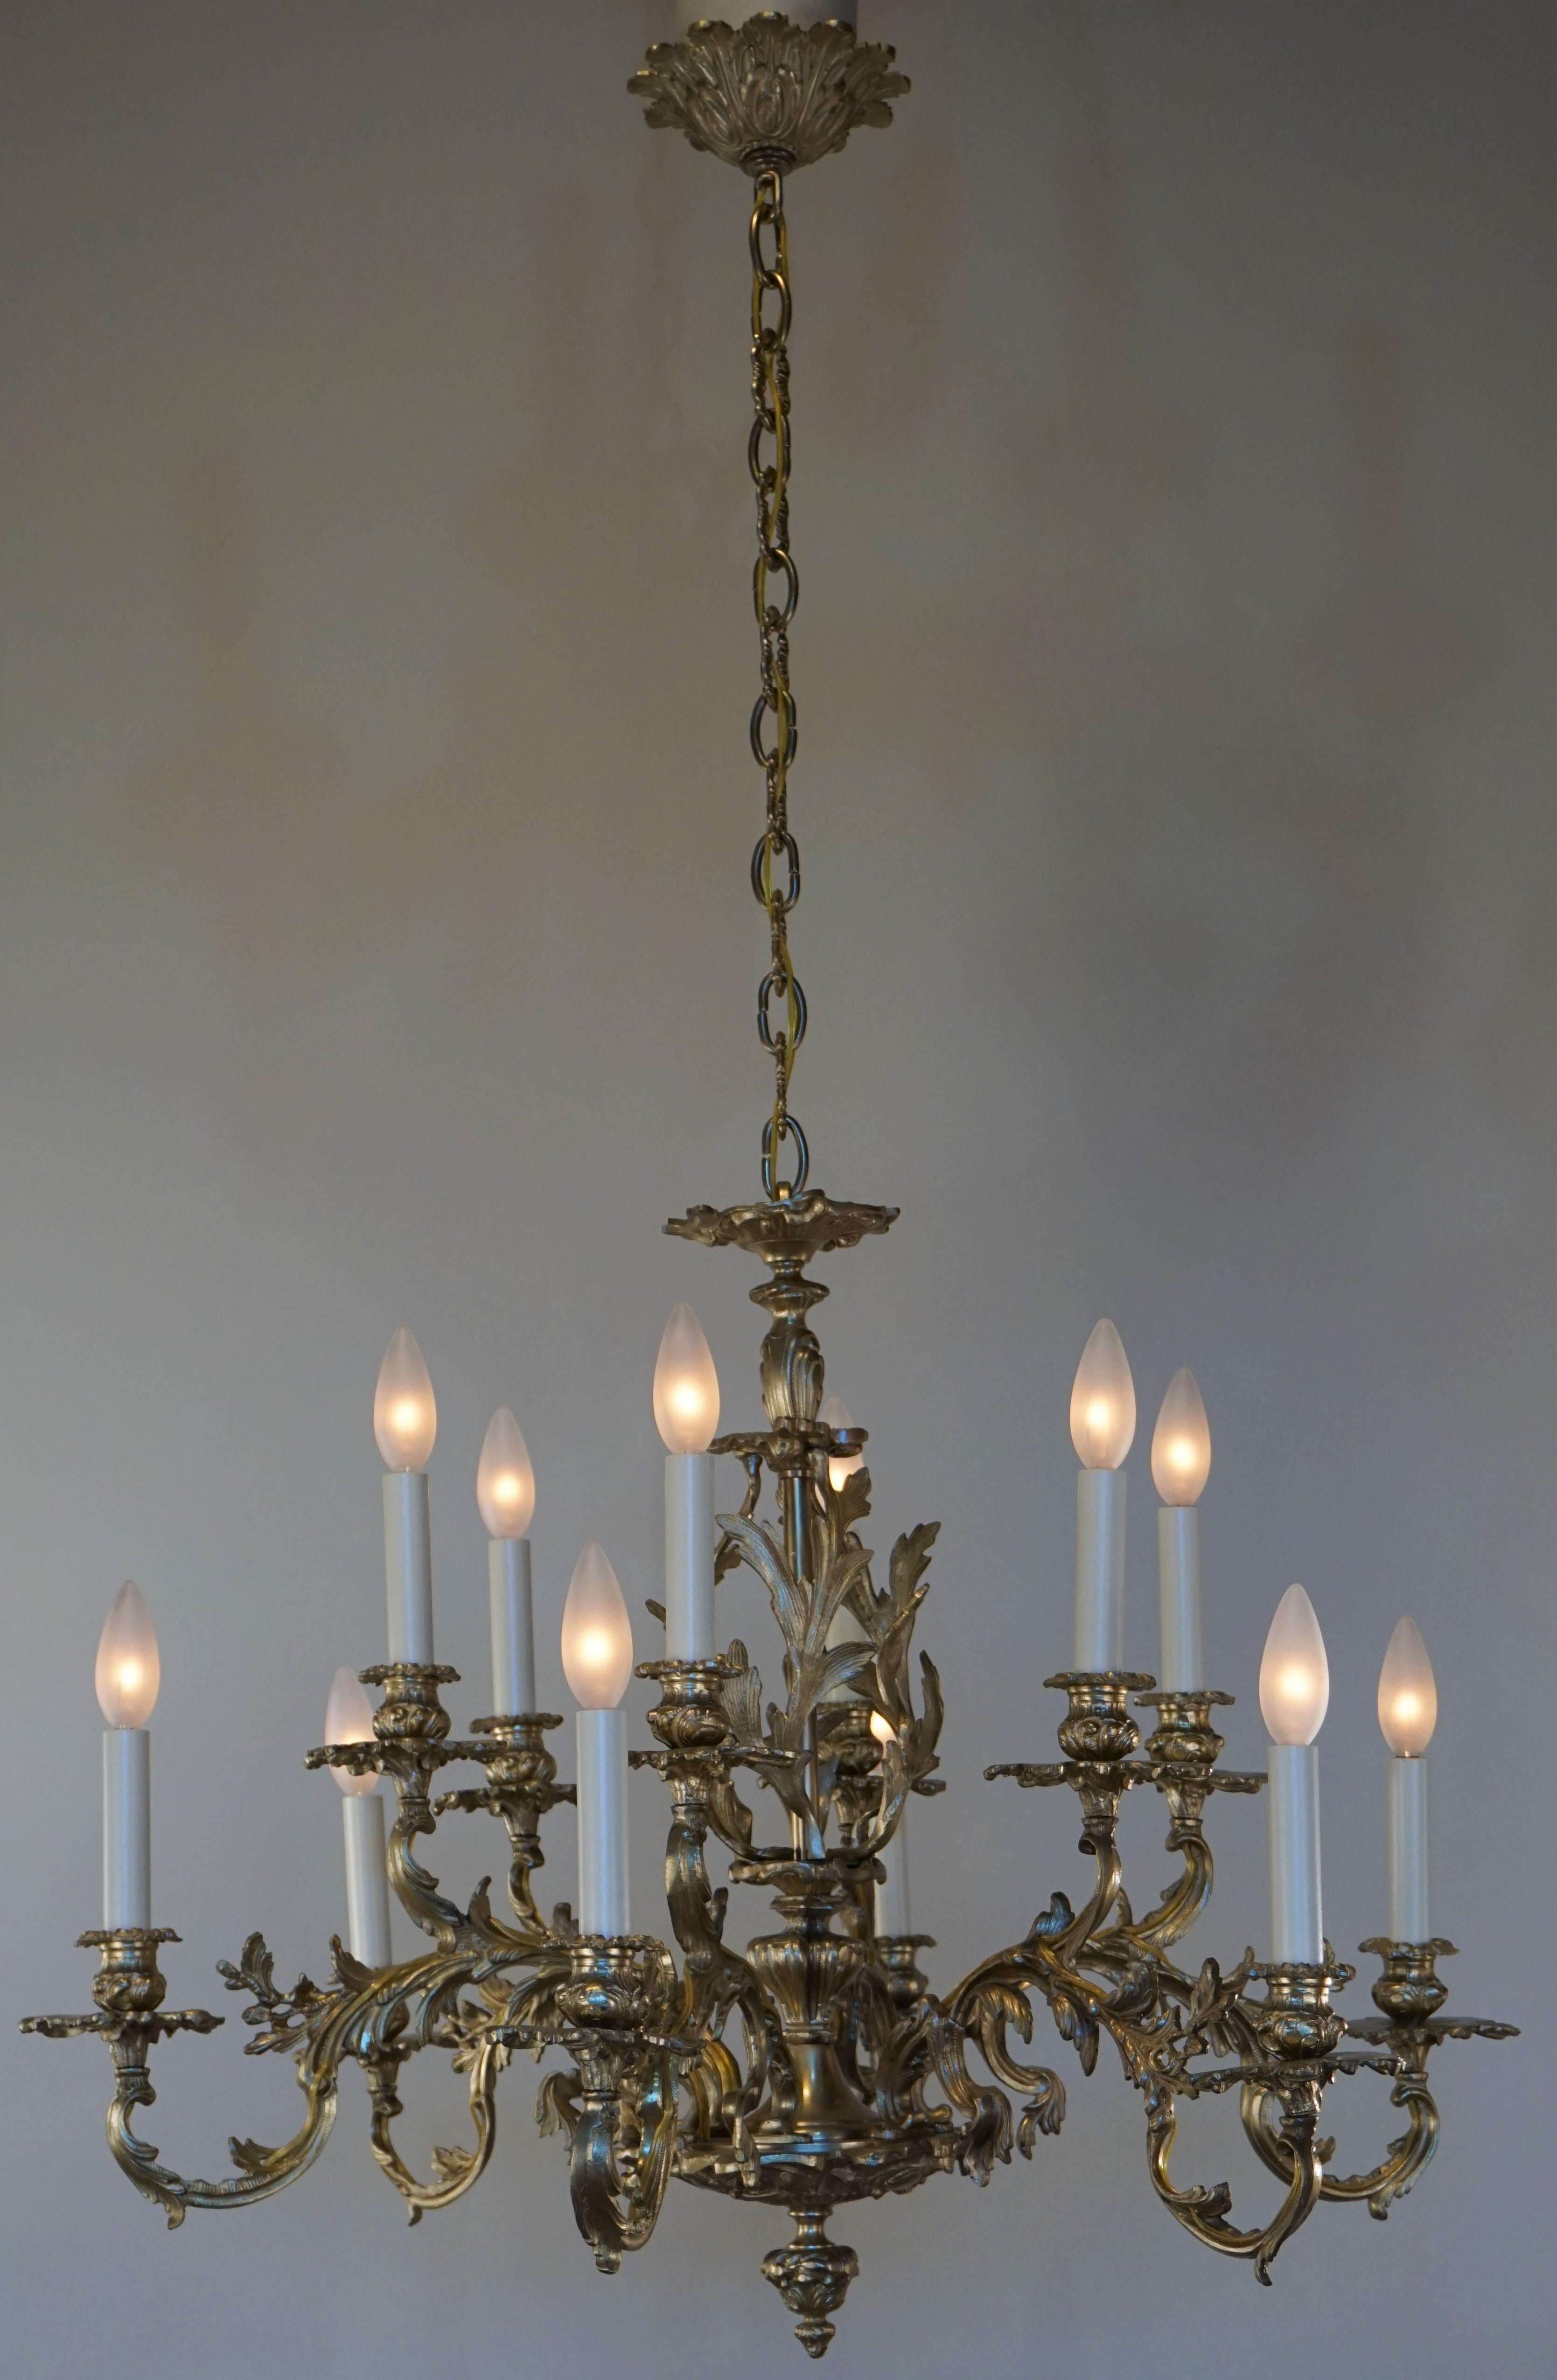 A fantastic twelve-light chandelier. Crafted in France by artisan during 19th century, this chandelier originally lit by candles. This chandelier is custom converted and electrified and no linger require was to be lit, this chandelier is as